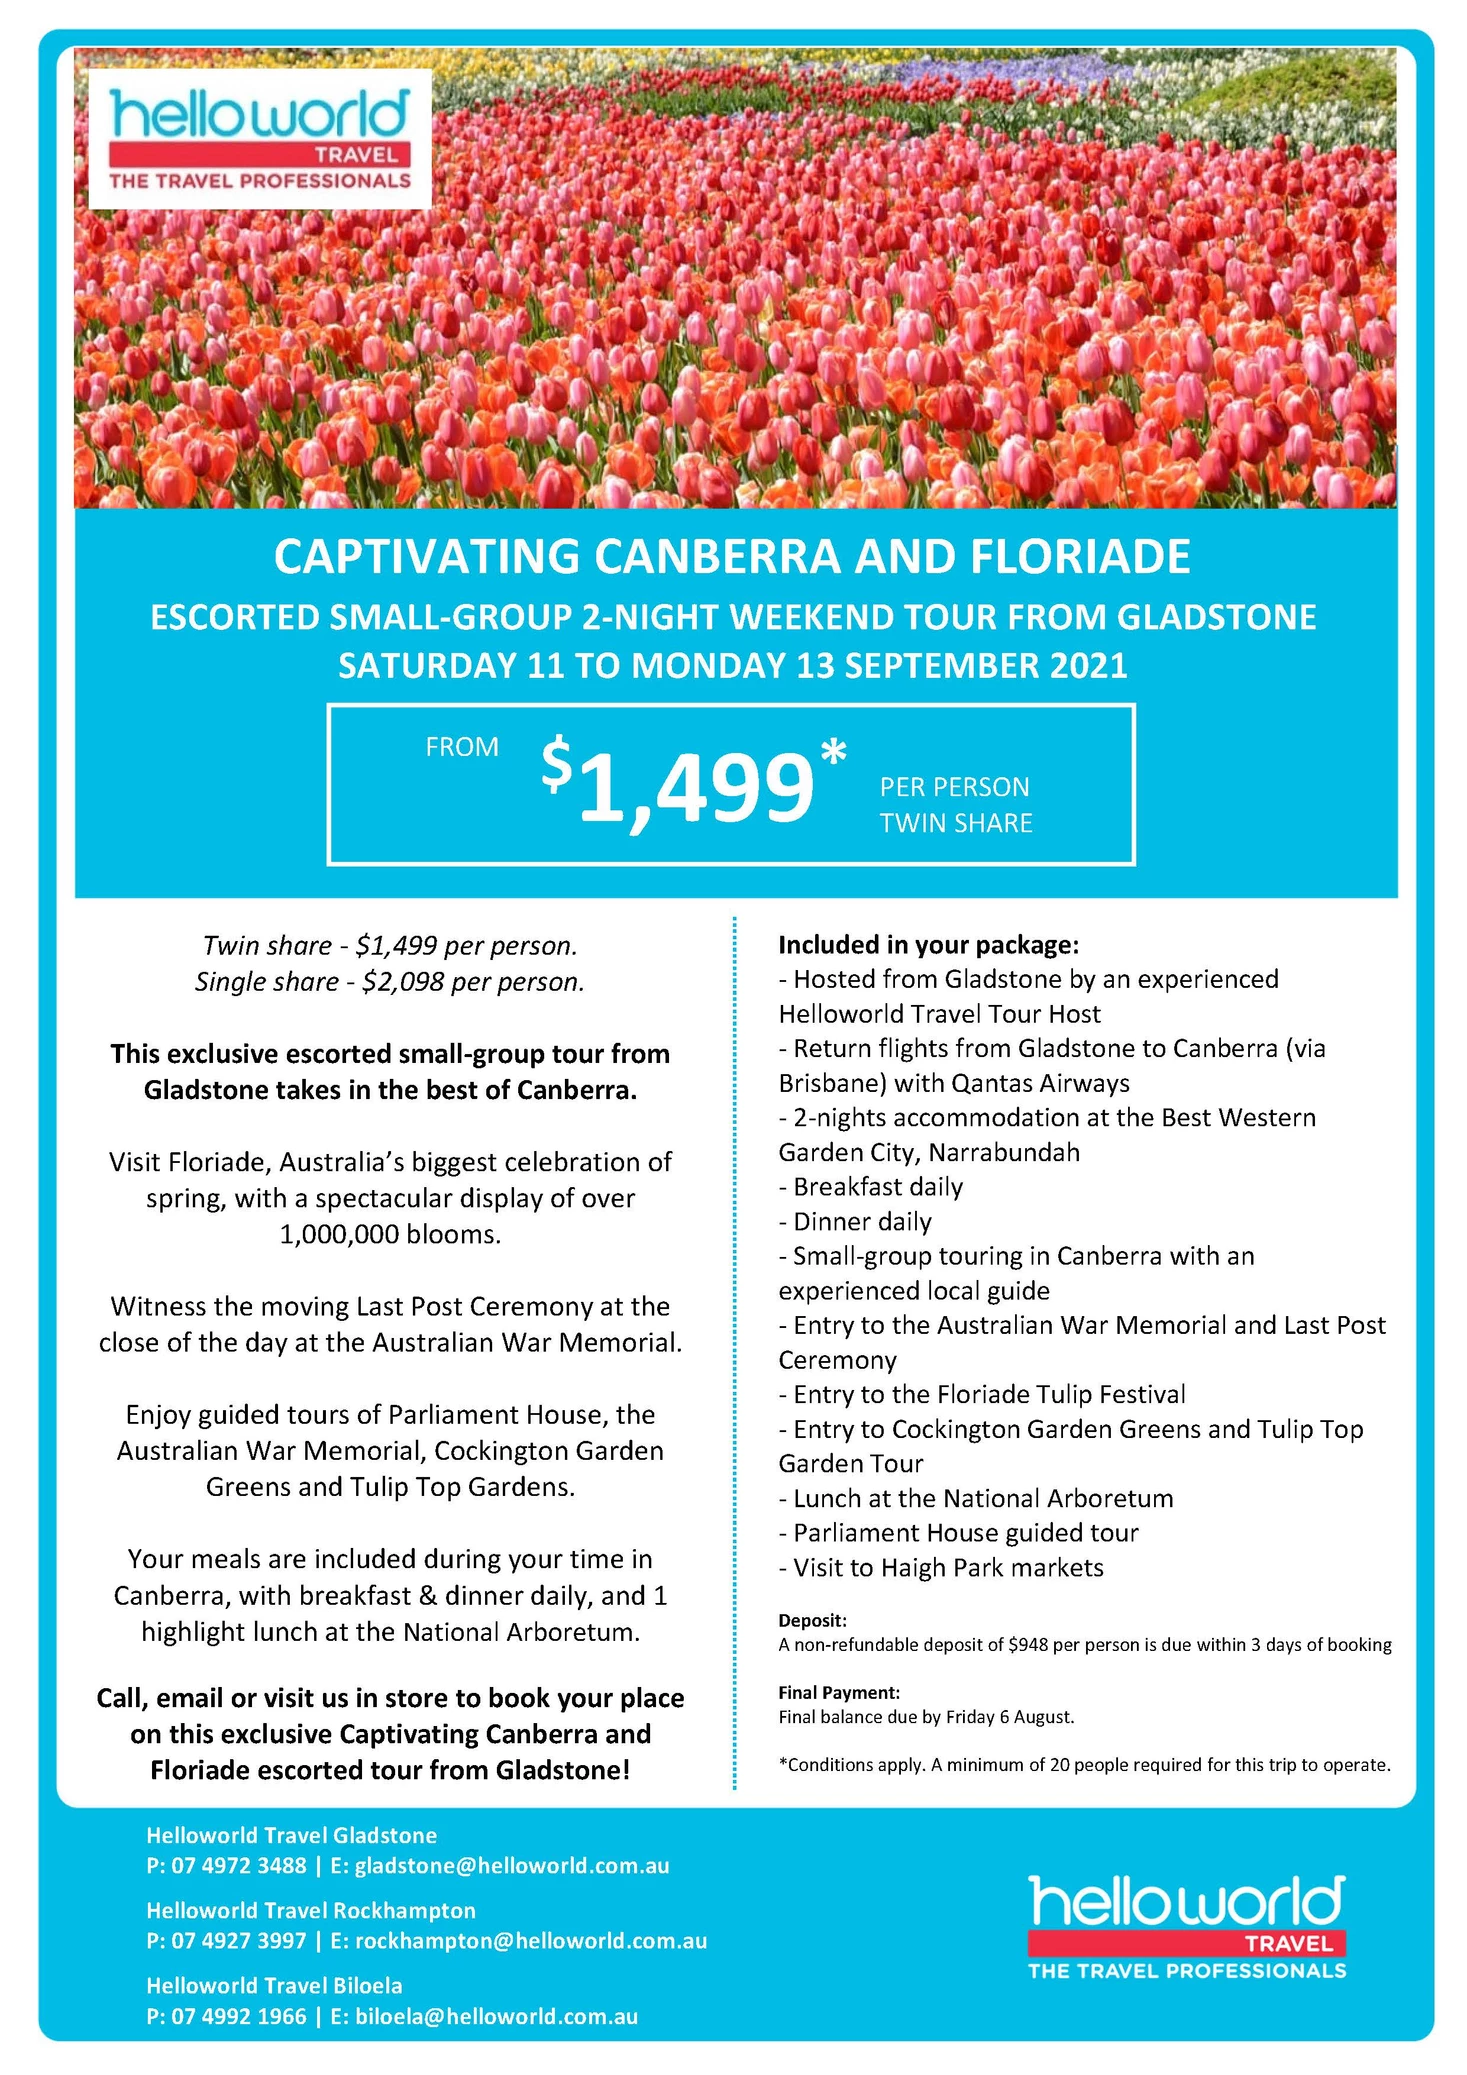 Captivating Canberra and Floriade